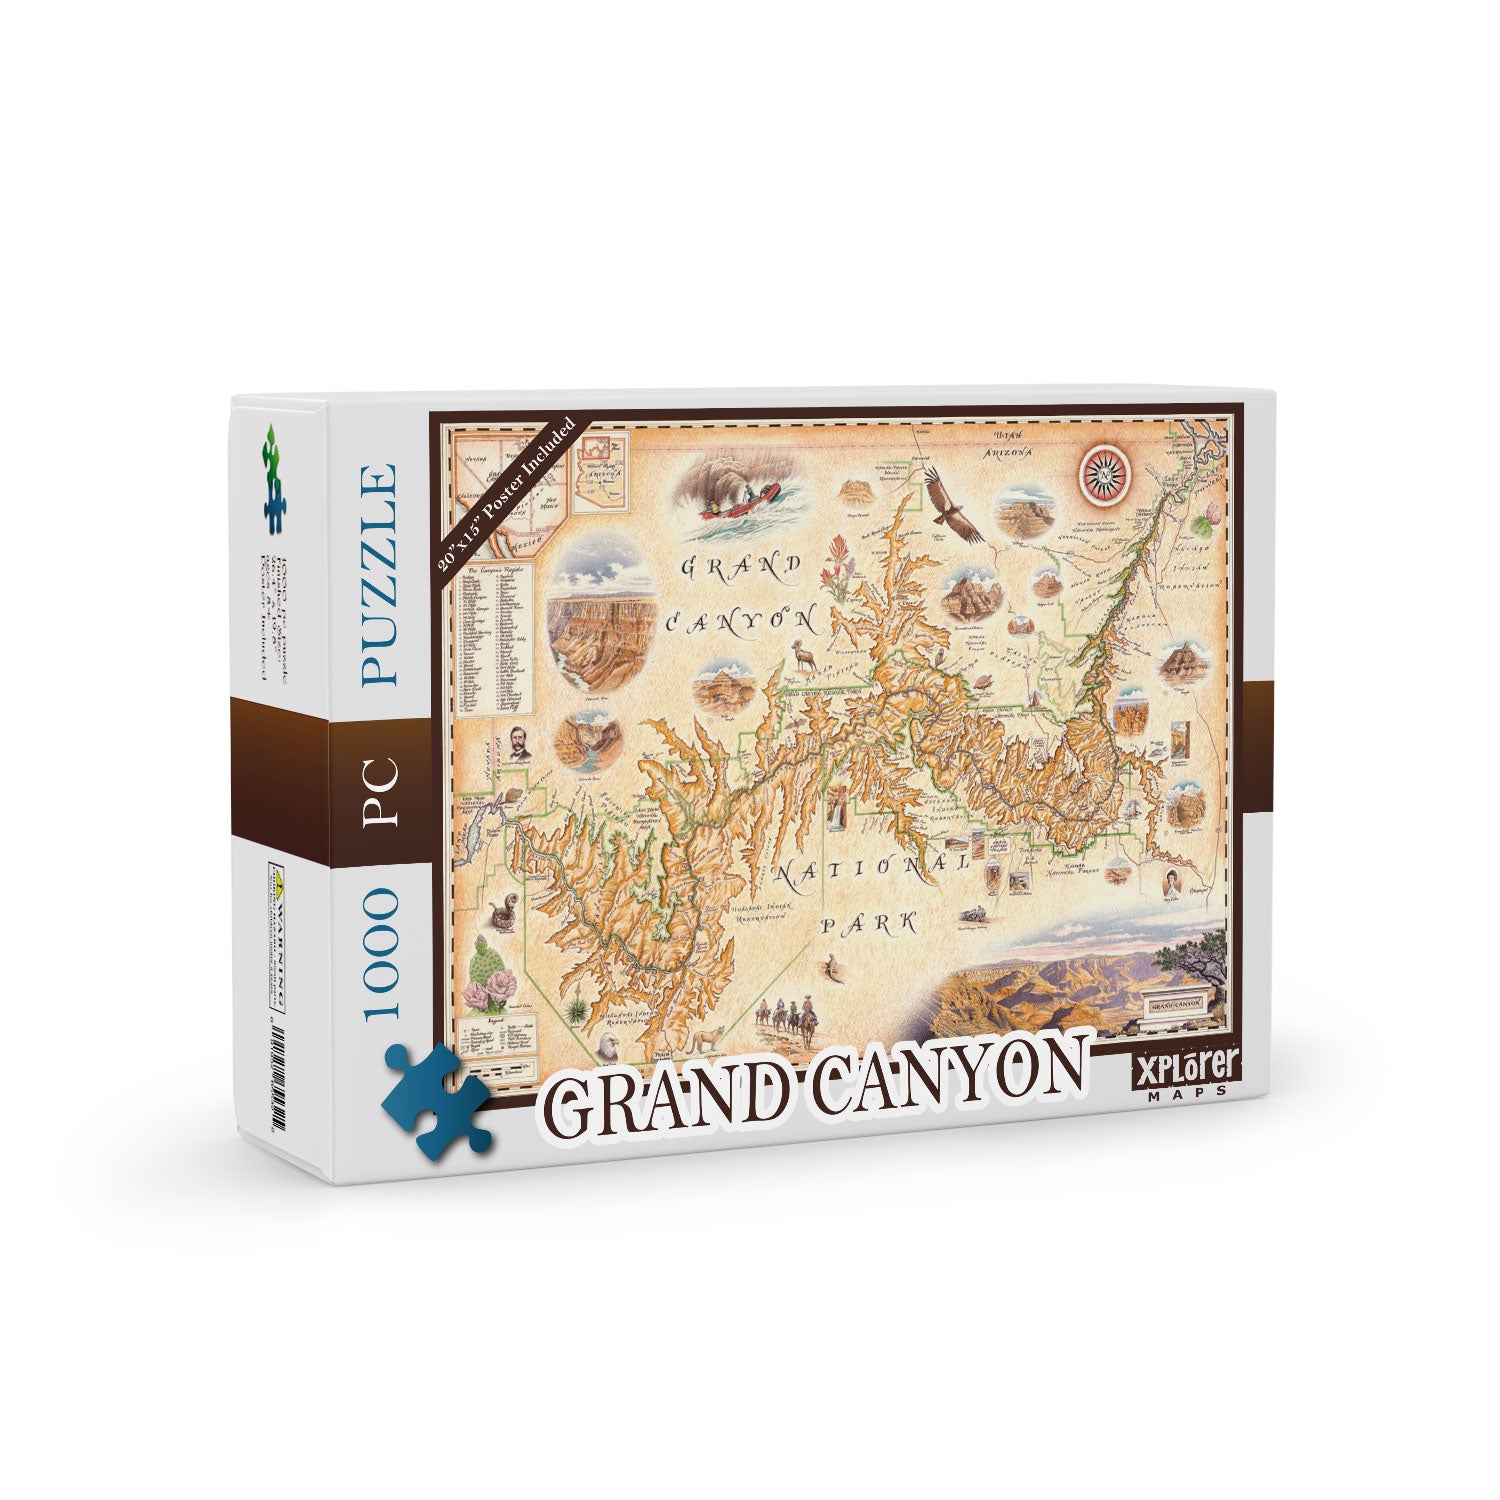 Grand Canyon National Park map 1000-piece puzzle. The map features illustrations of activities like whitewater rafting and mule riding, along tortoise, California Condor, and Beavertail Cactus.